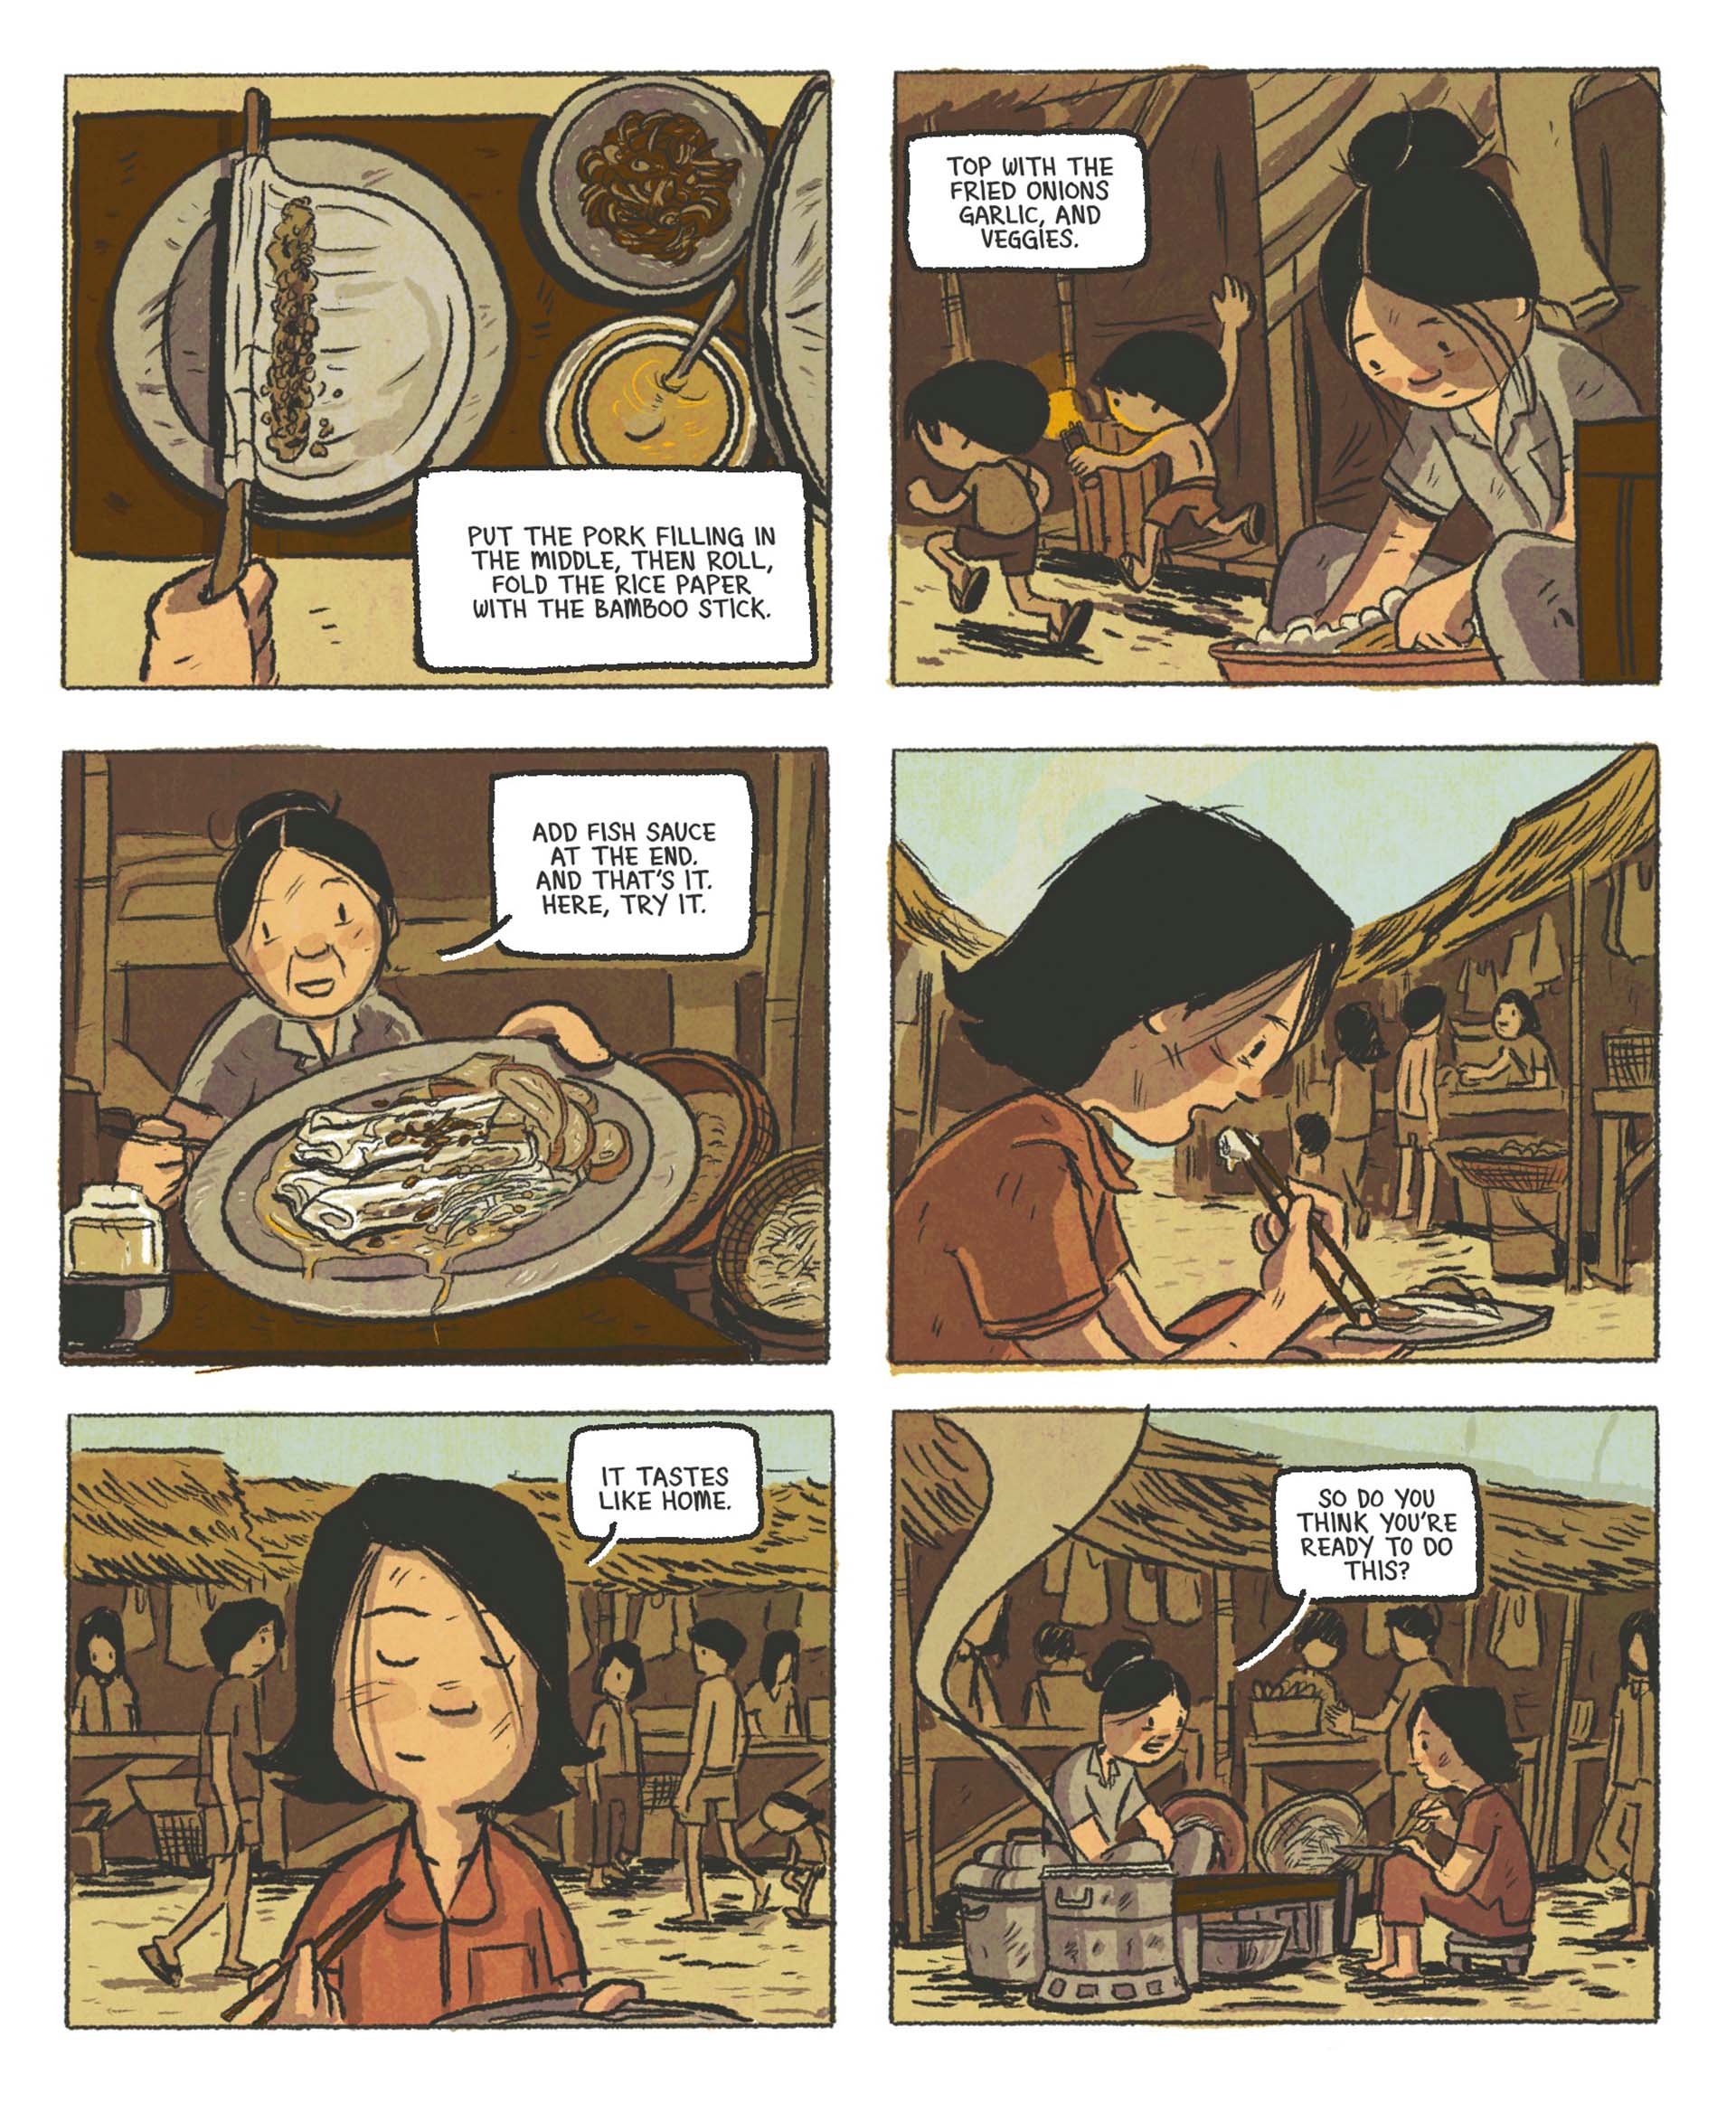 Excerpted panels from a graphic novel: 1) Image of a thin rice crepe on a plate. Text reads, "Put the pork filling in the middle, then roll, fold the rice paper with the bamboo stick. 2) A woman reaches into a bowl, assembling the banch cuon. Text reads, "Top with the fried onions, garlic, and veggies." 3) She holds out a plate with the finished banh cuon. "Add fish sauce at the end. And that's it. Here, try it." 4) Another woman in a red blouse picks up a piece with chopsticks. 5) She eats it with her eyes closed in pleasure. "It tastes like home," she says. 6) The panel zooms out to show the two of them sitting in front of a small stall made up of various cooking implements. "So do you think you're ready to do this?" the woman who prepared the banh cuon asks.